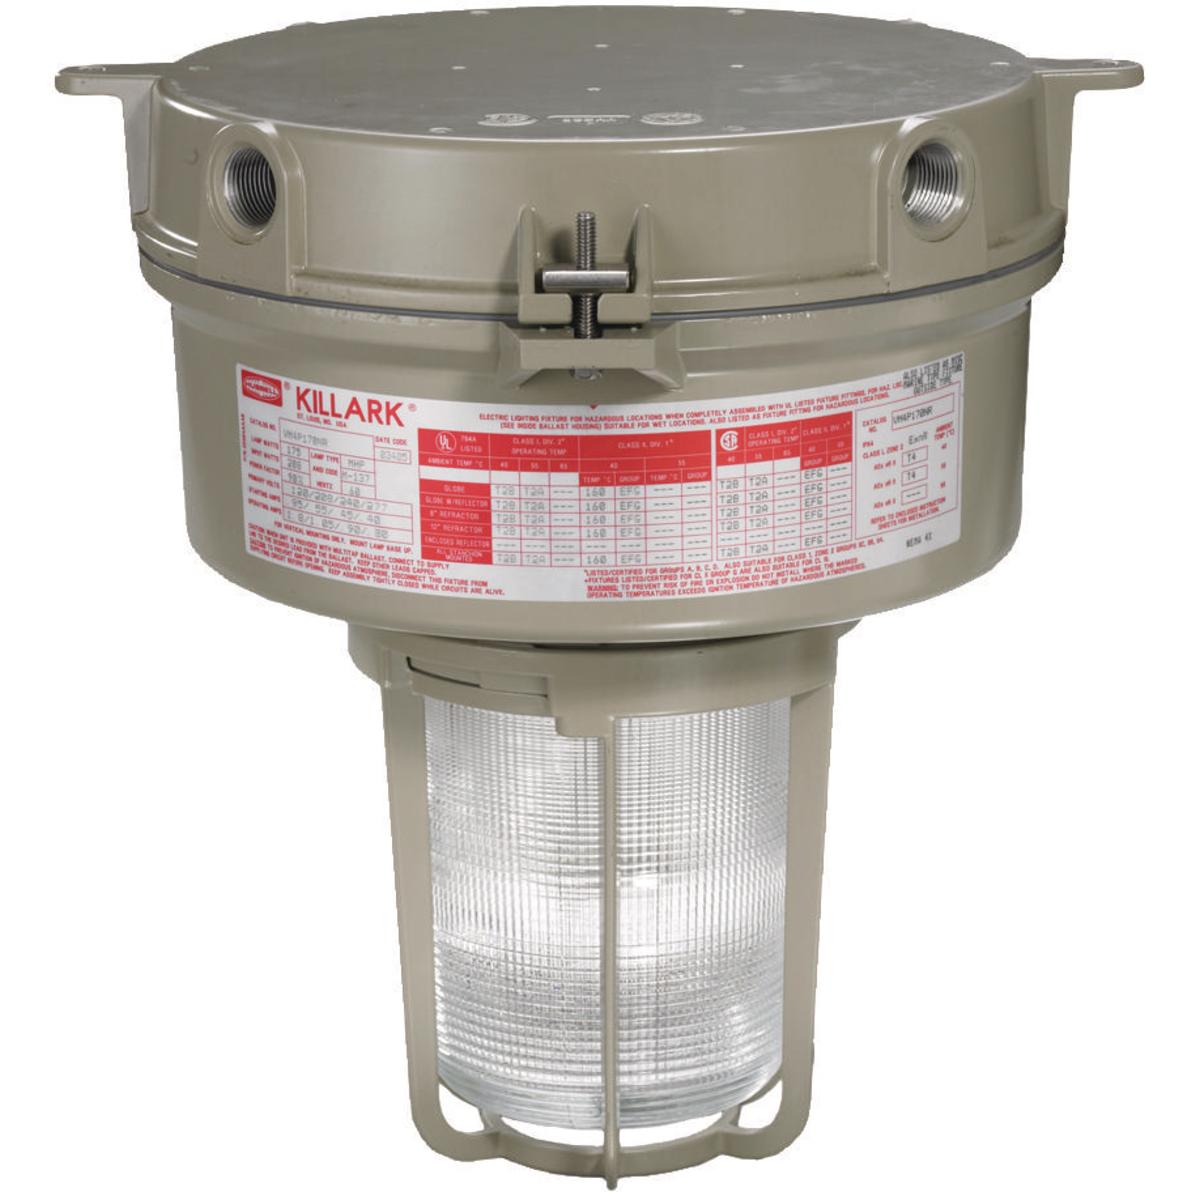 Hubbell VE3Q1818E30X2R5G VE3 18W Normal/Emergency,120-277V, 3/4" Ceiling Mount, Type V Glass Refractor with Guard  ; Quad-Pin triple-tube long-life compact fluorescent lamps included ; World Voltage 120-277VAC 50-60 Hz ; LED charging indicator light visible through lens ; Prewire